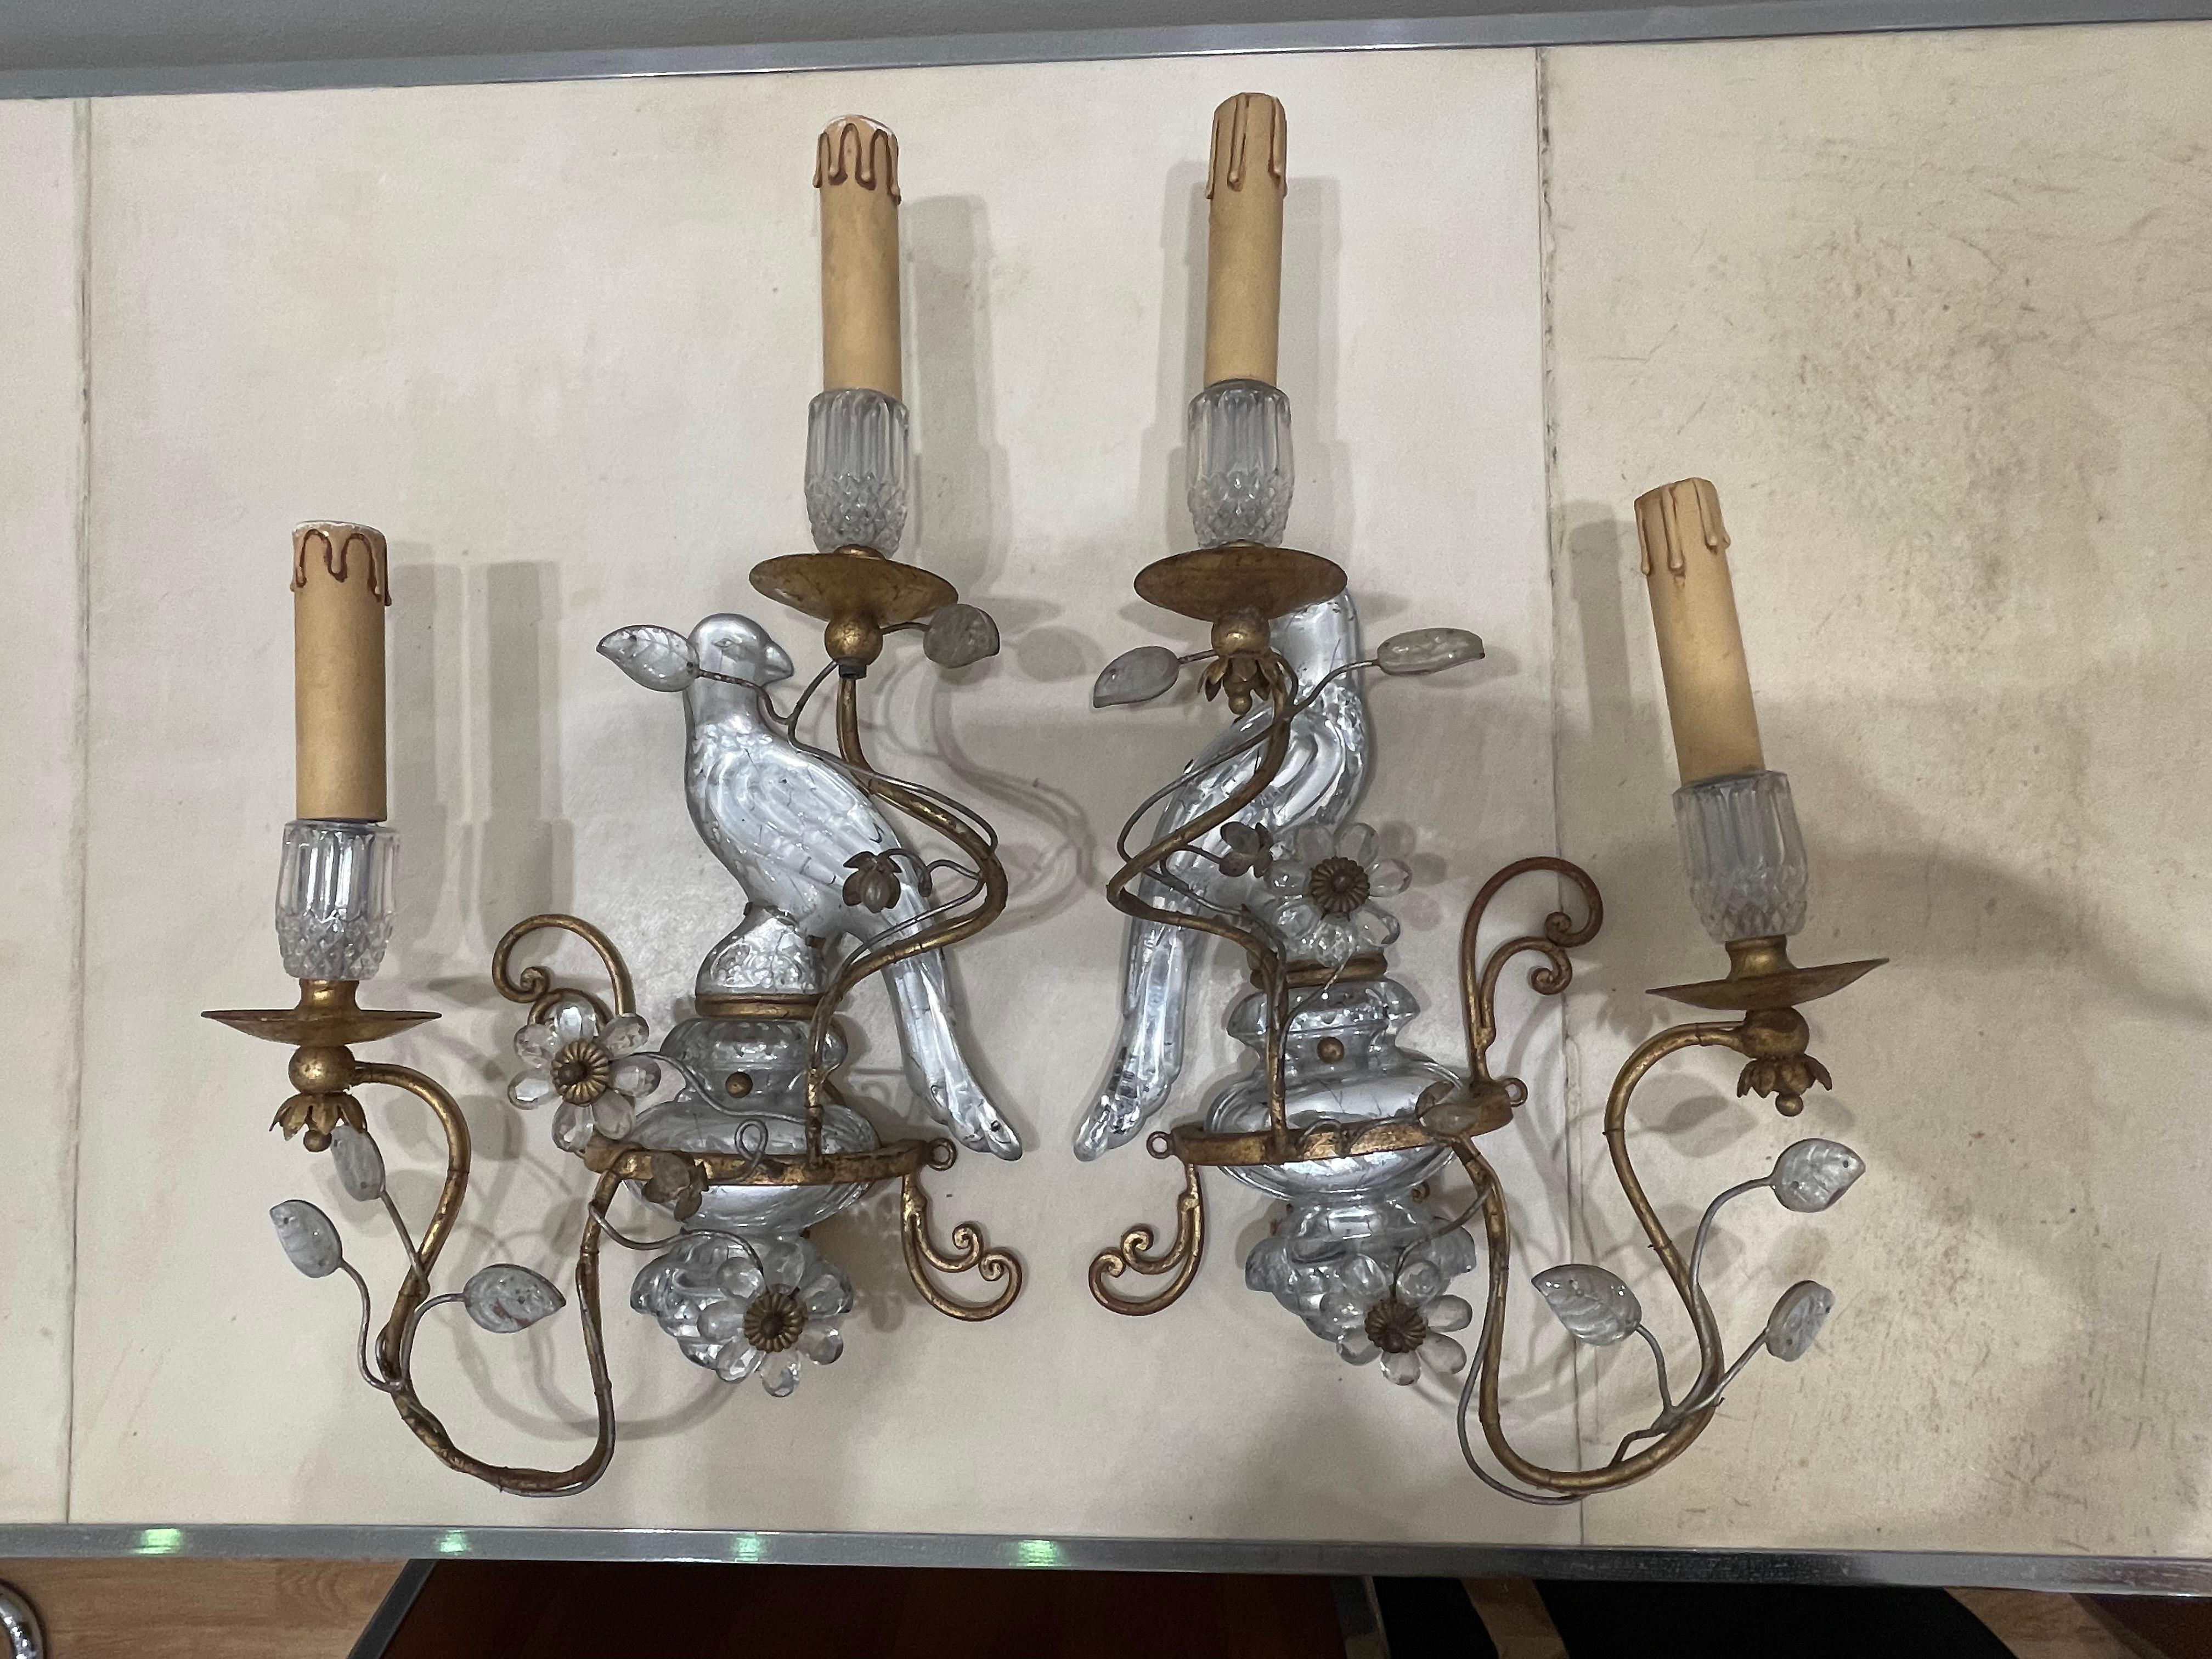 Stunning pair of sconces by Maison Baguès (Paris). This model with the parrots is iconic and made Maison Baguès famous and successful. They are ancient : circa 1930's-1940's and in good condition.
Two lights per sconce. Decorative motifs (parrots,